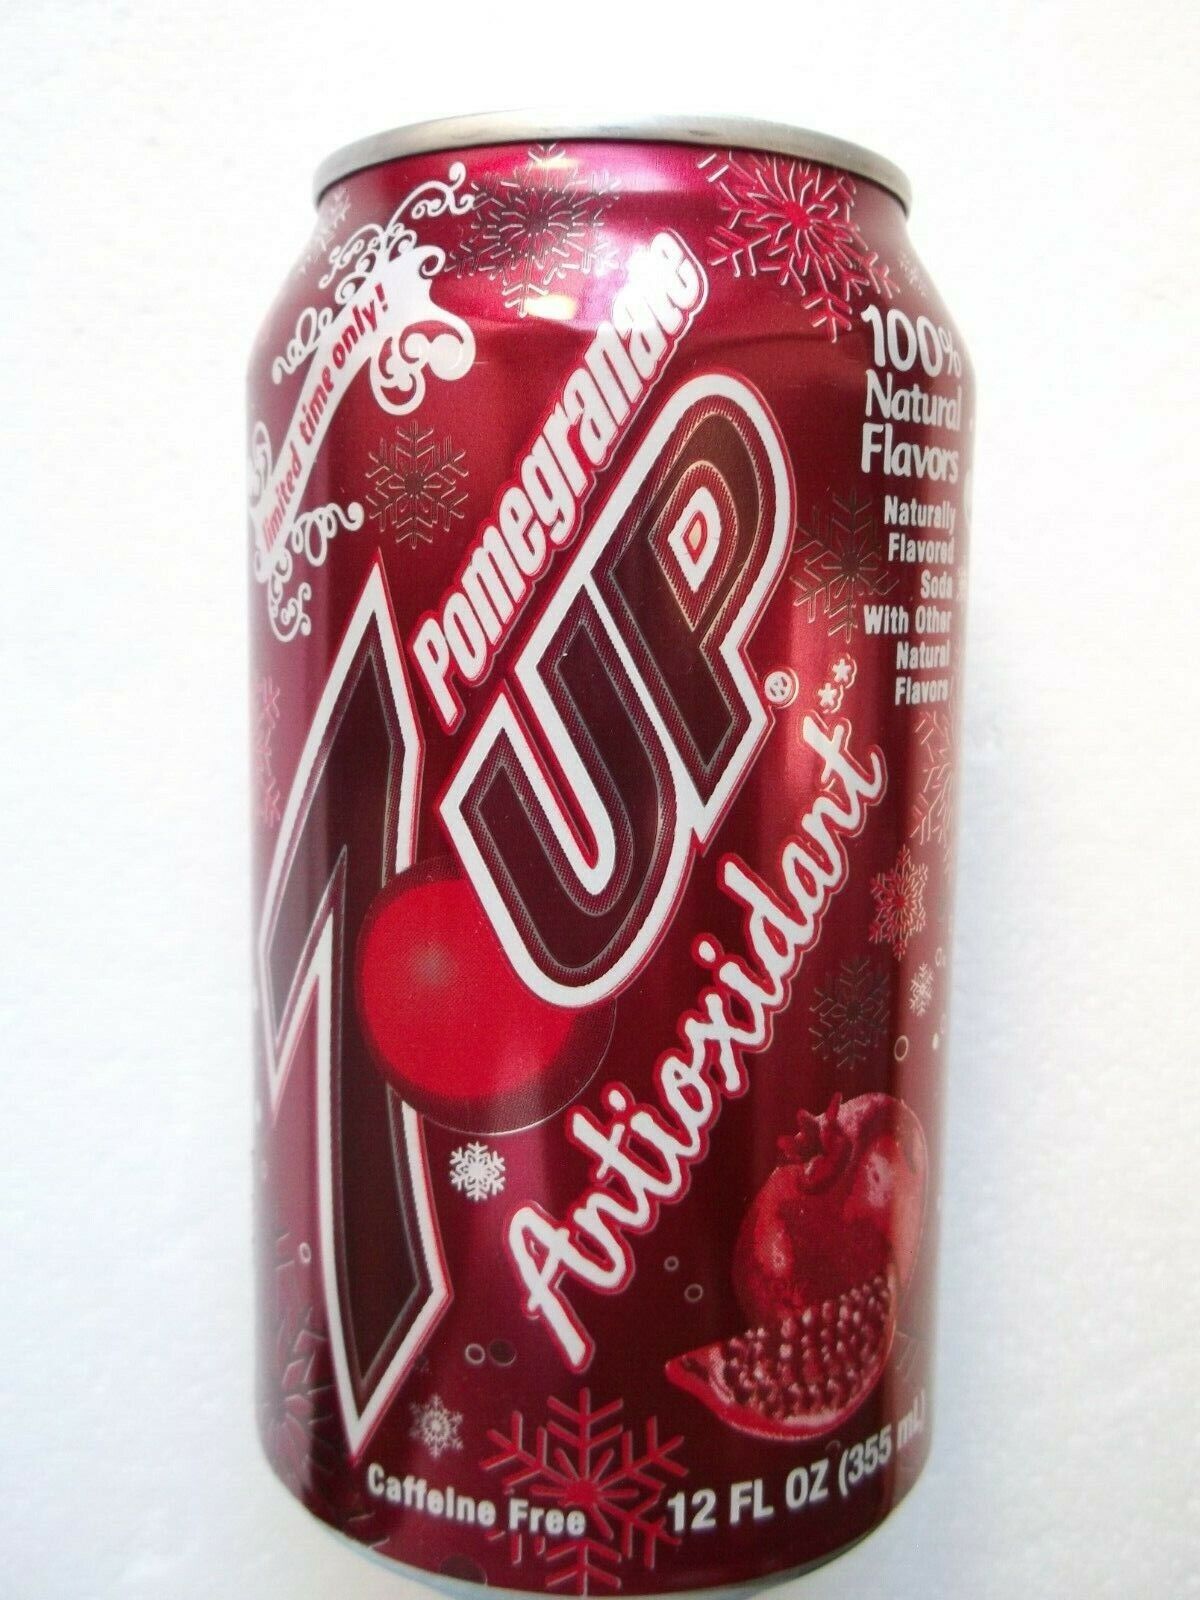 7 UP POMEGRANATE ANTIOXIDANT 2011 USA empty can top opened 355ml